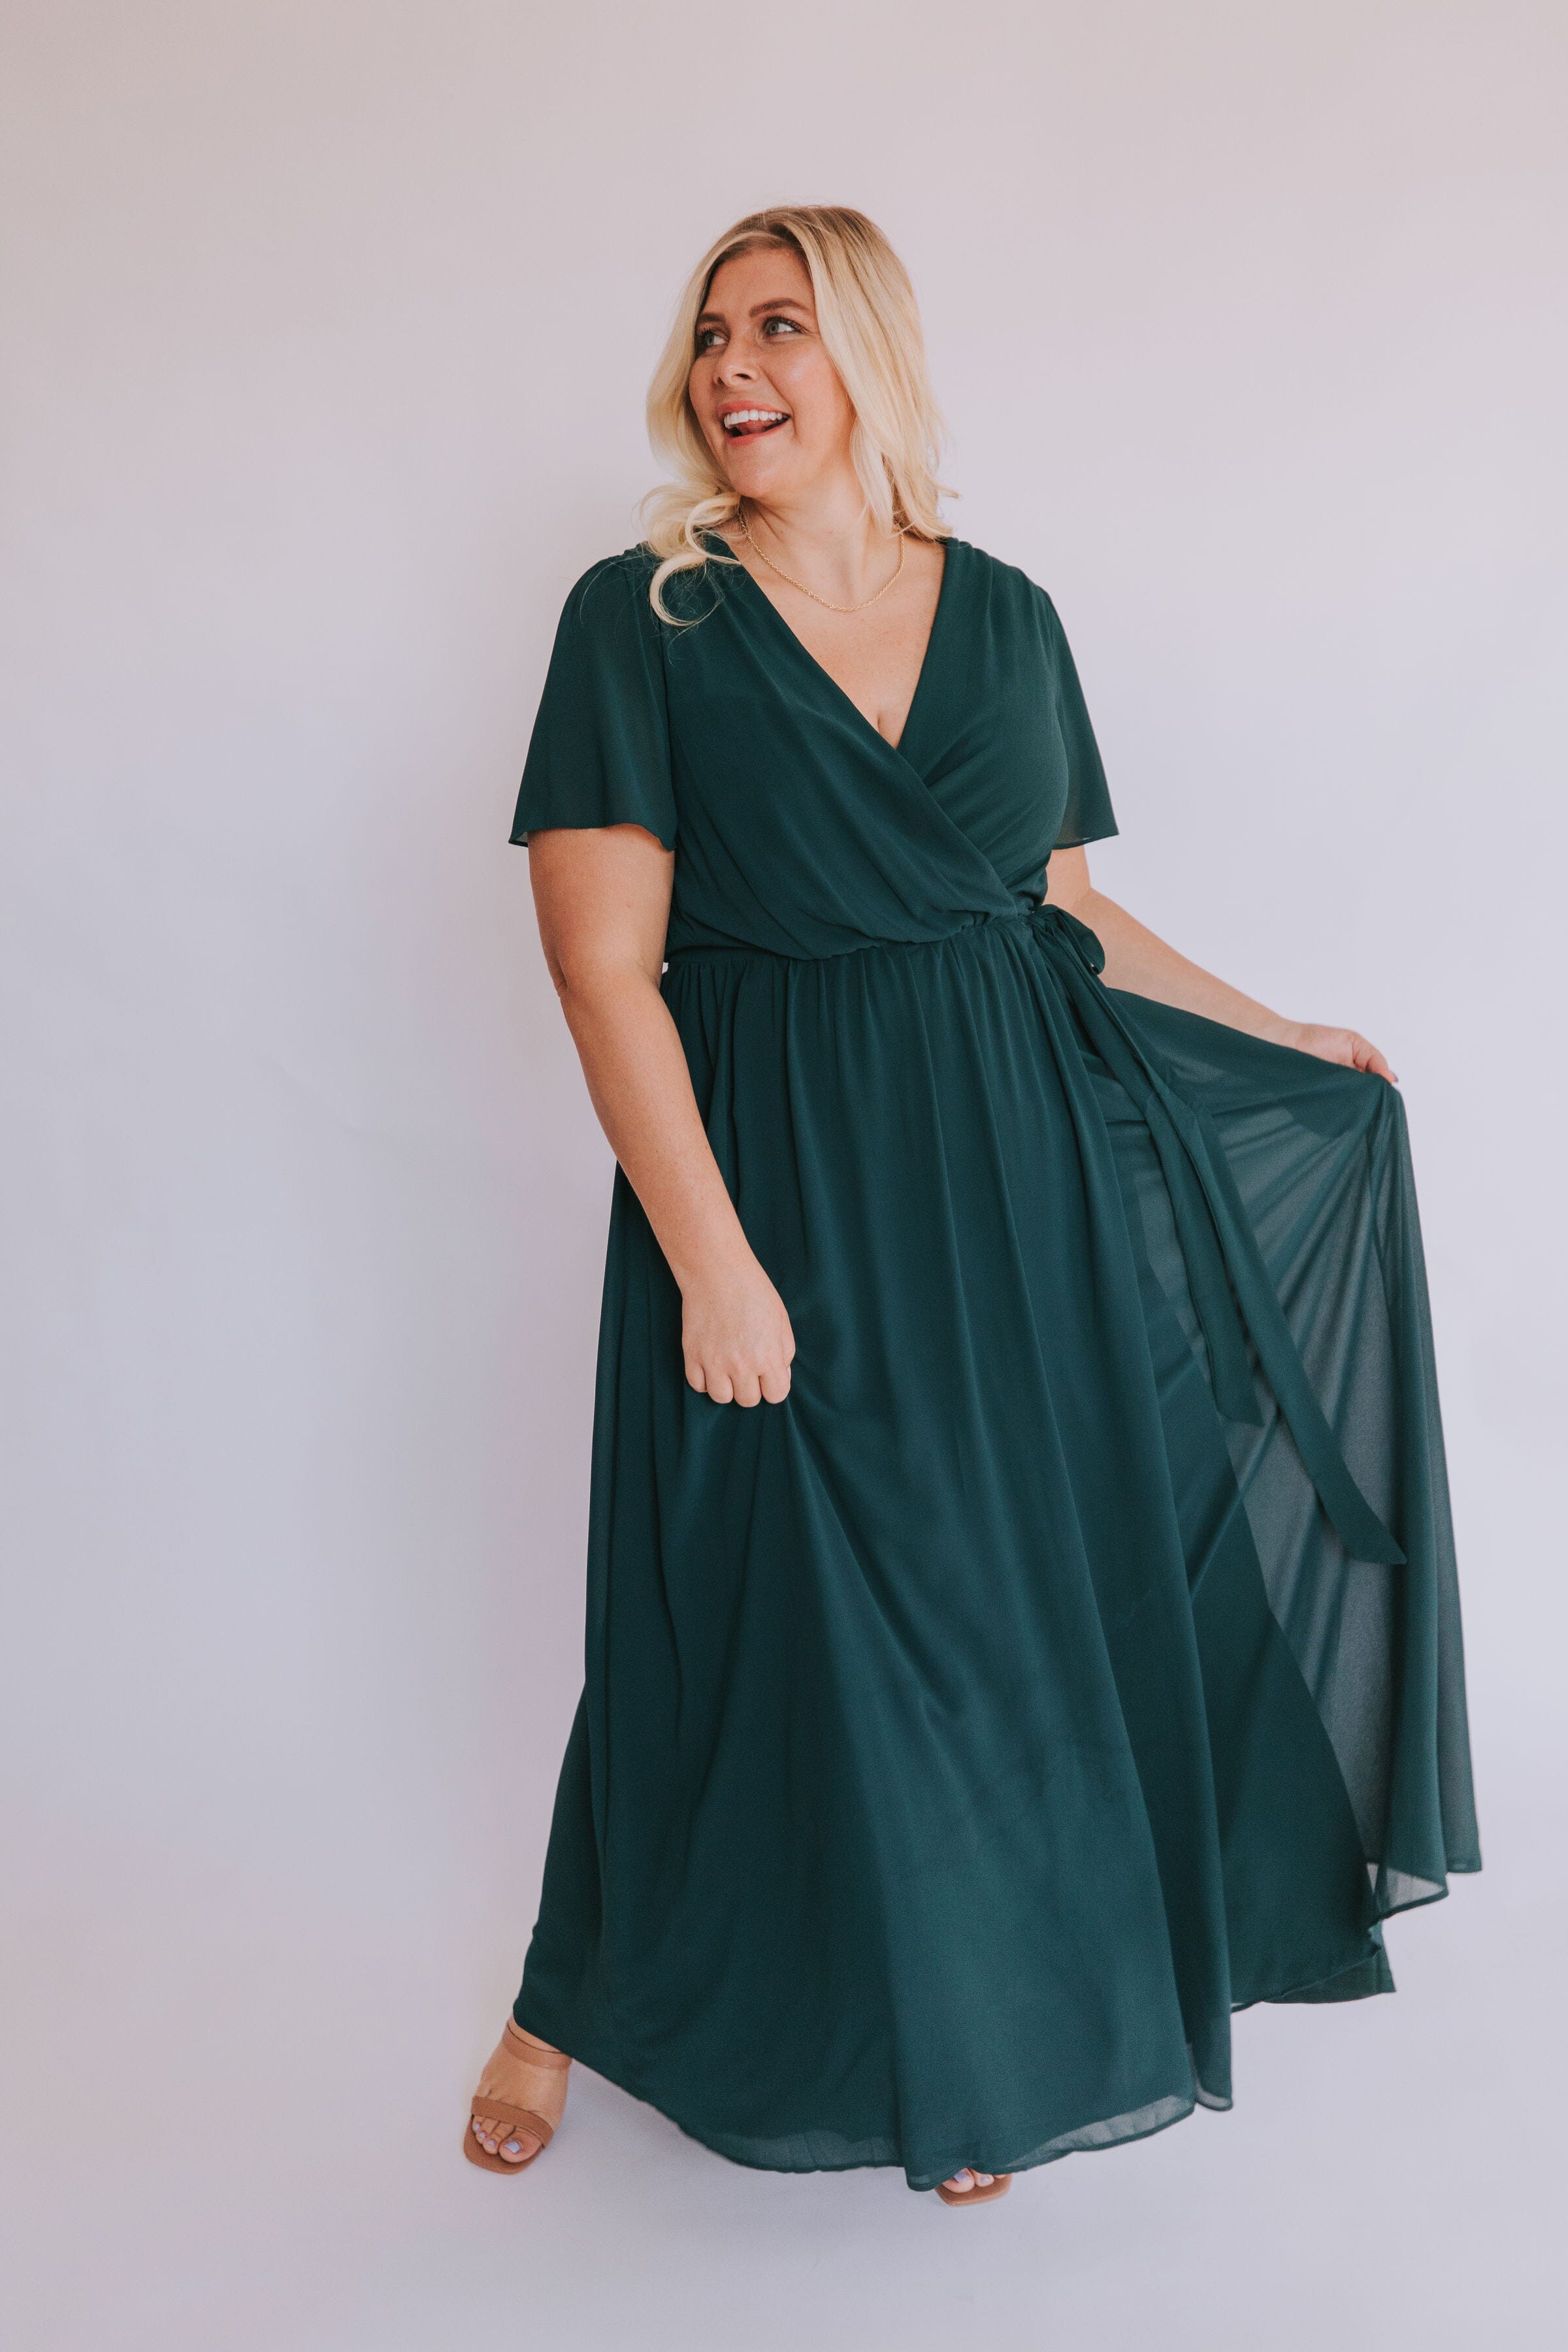 PLUS SIZE - Staying Here Dress - 2 Colors!